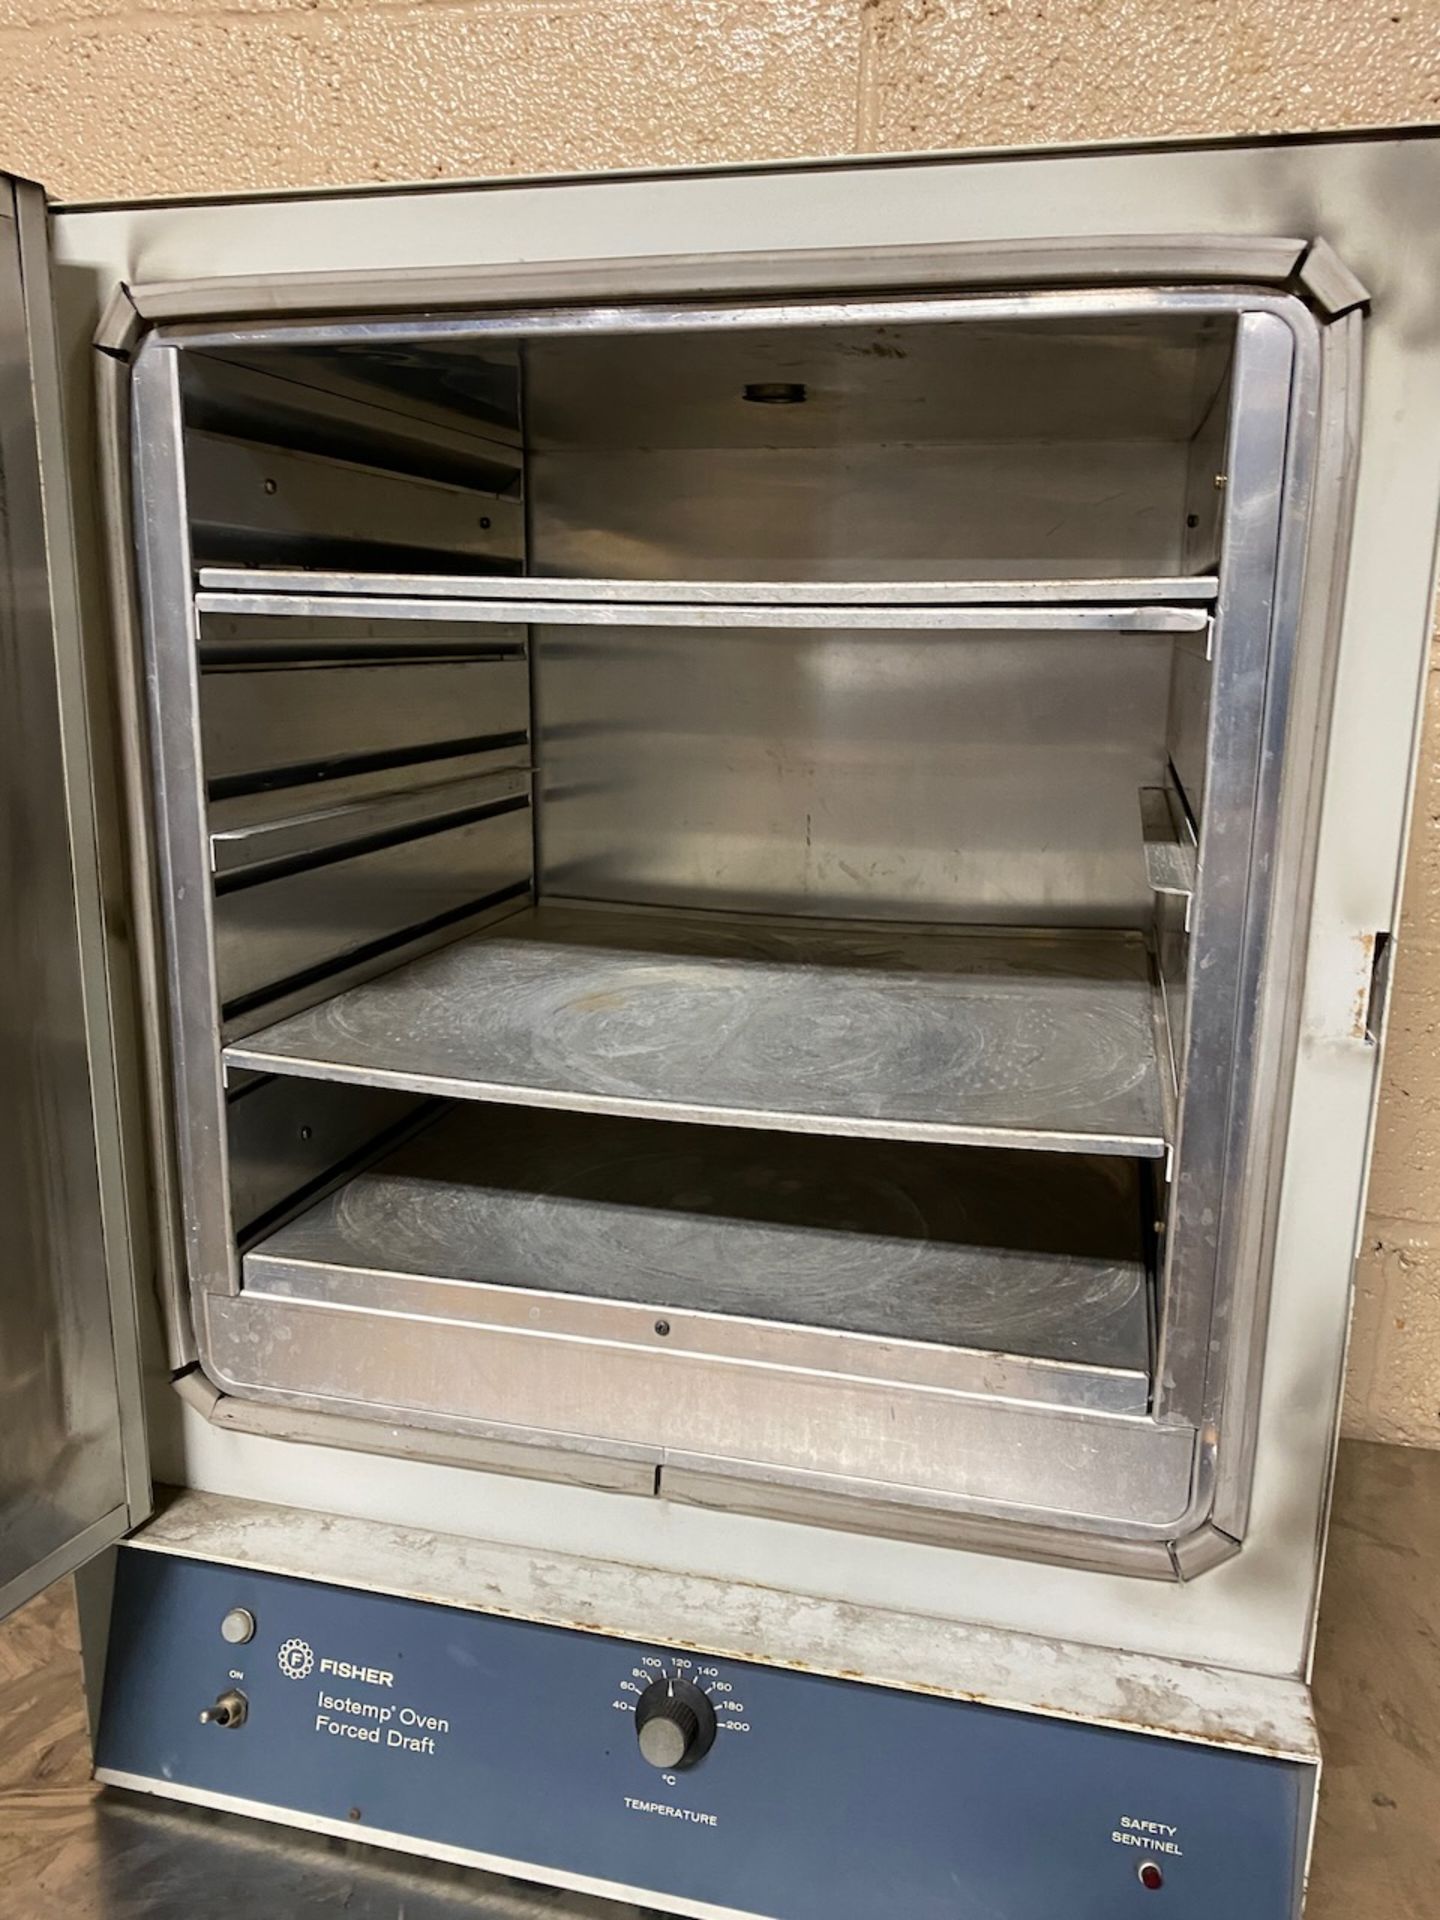 Fisher scientific Isotemp forced draft oven, model 412, made in 133, 15" x 16" x 16" tall - Image 2 of 4